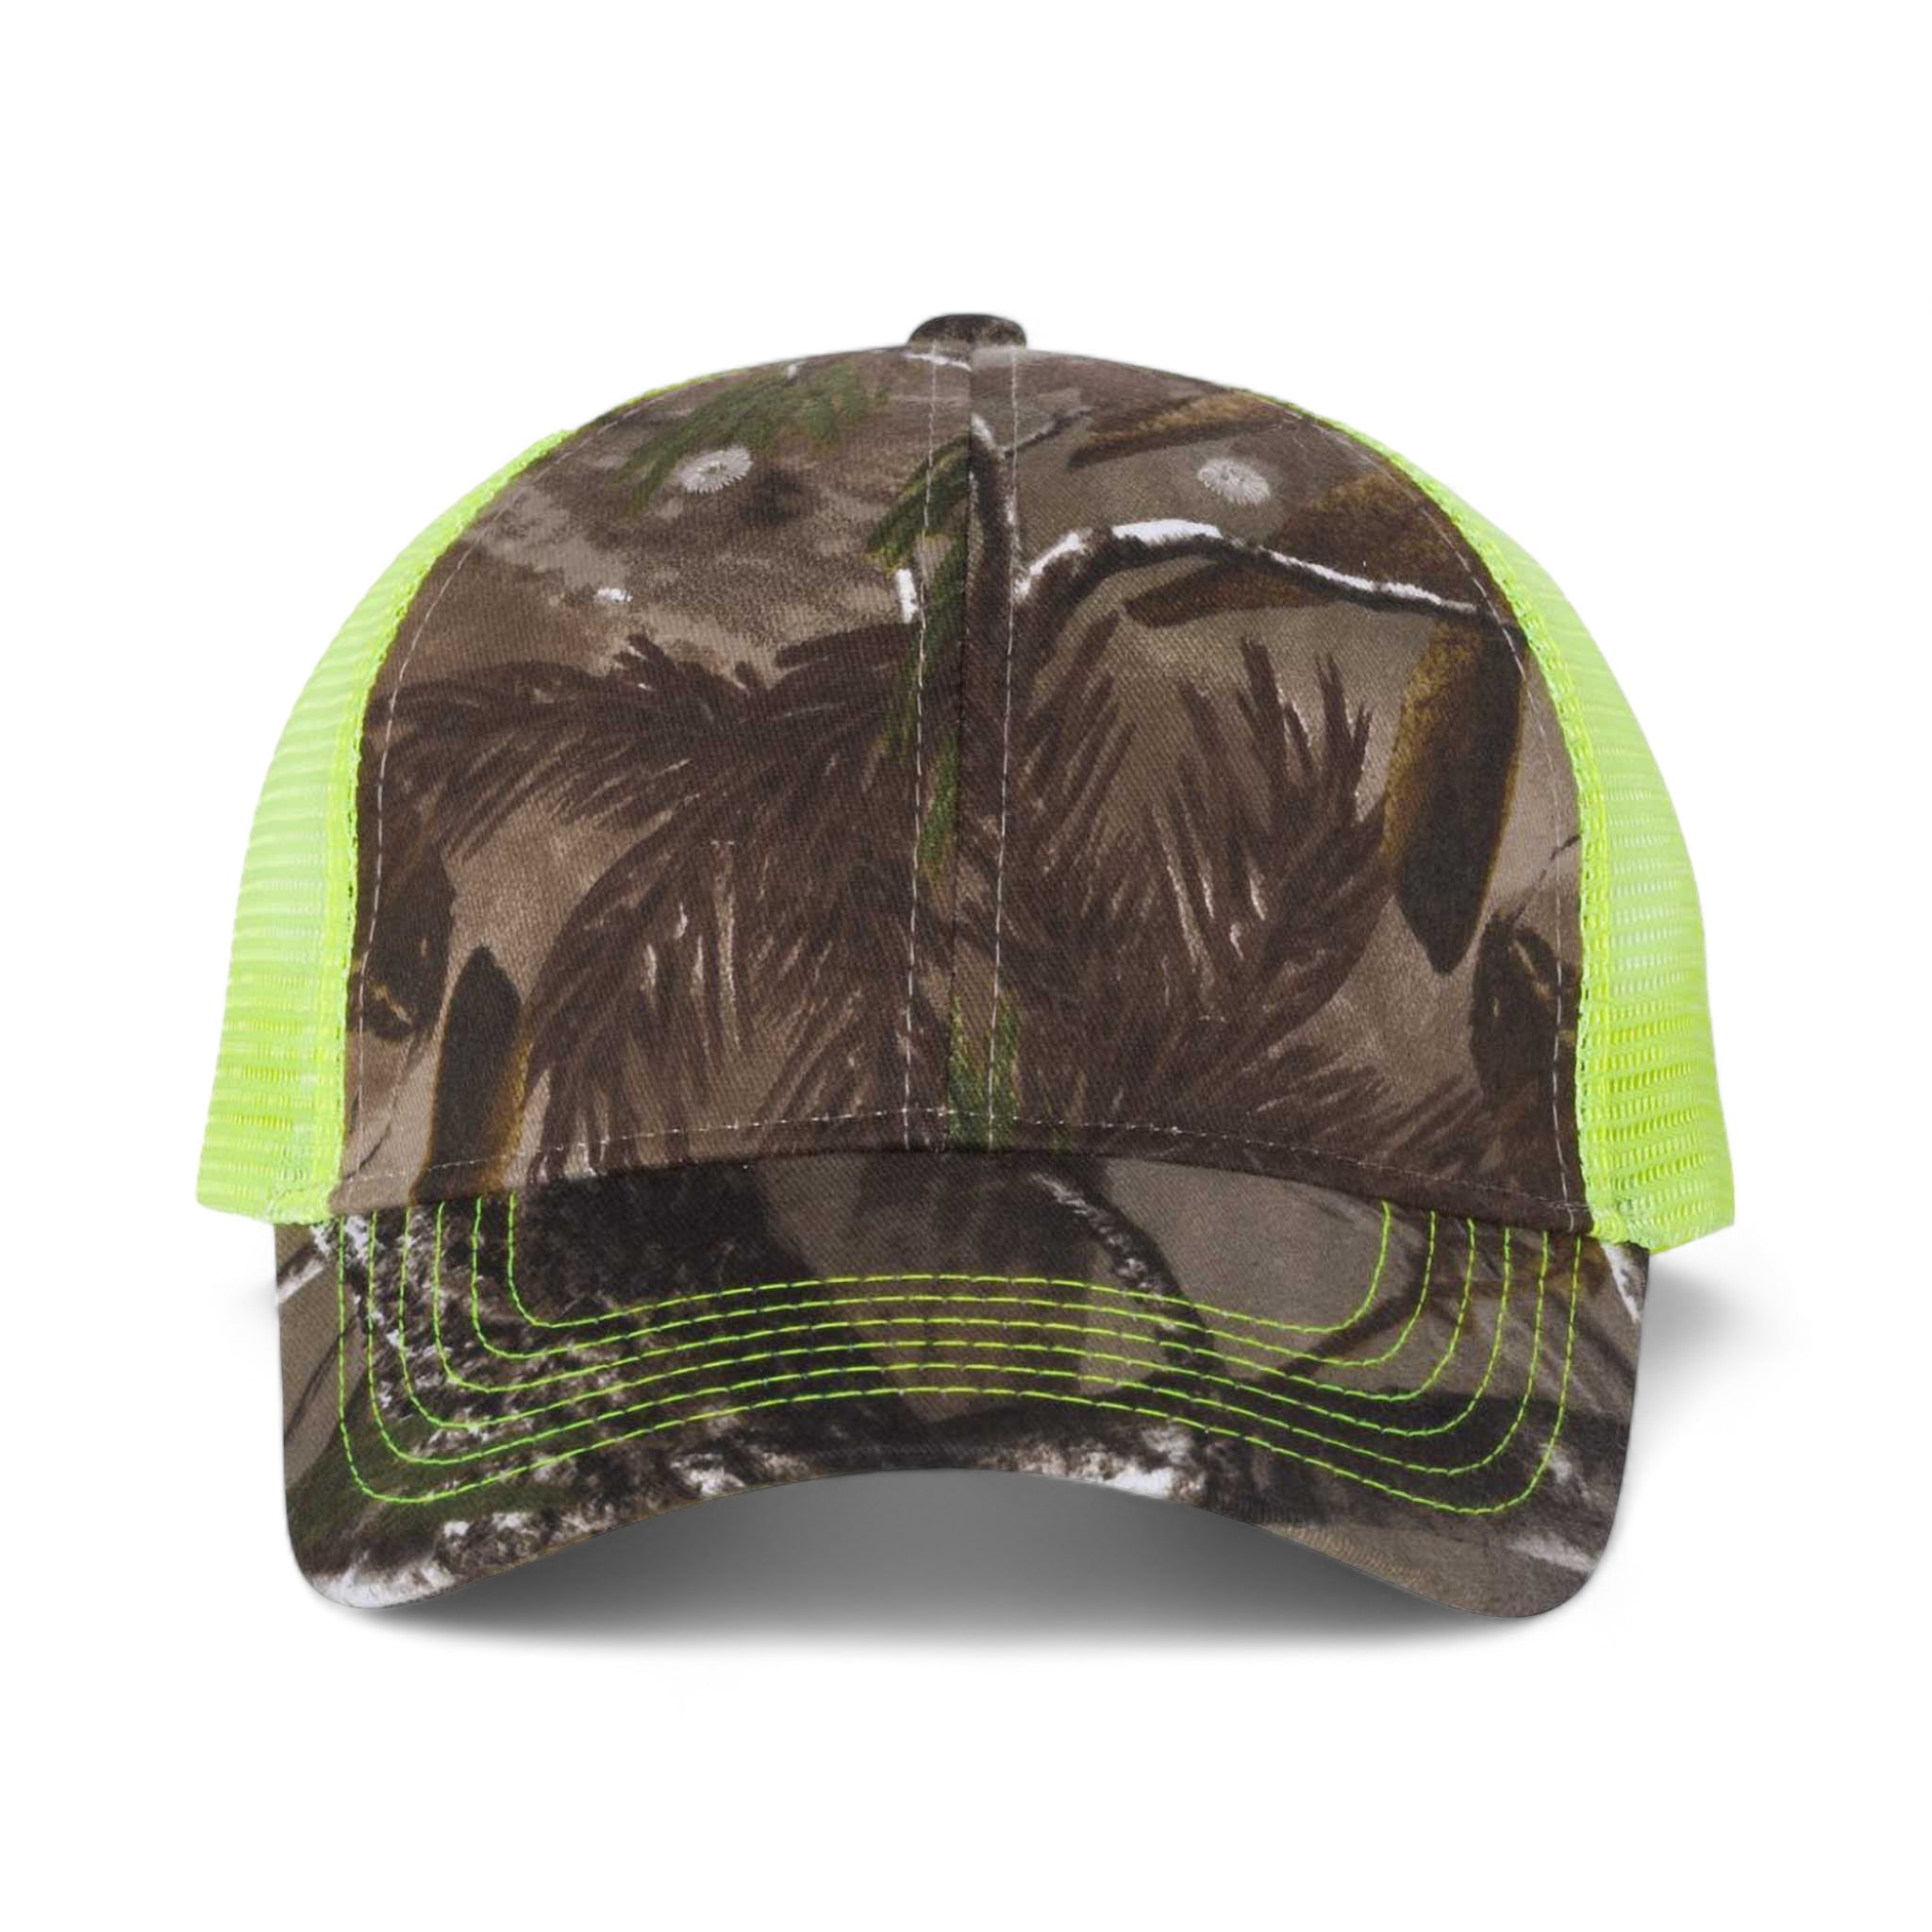 Front view of Kati LC5M custom hat in realtree ap and neon yellow